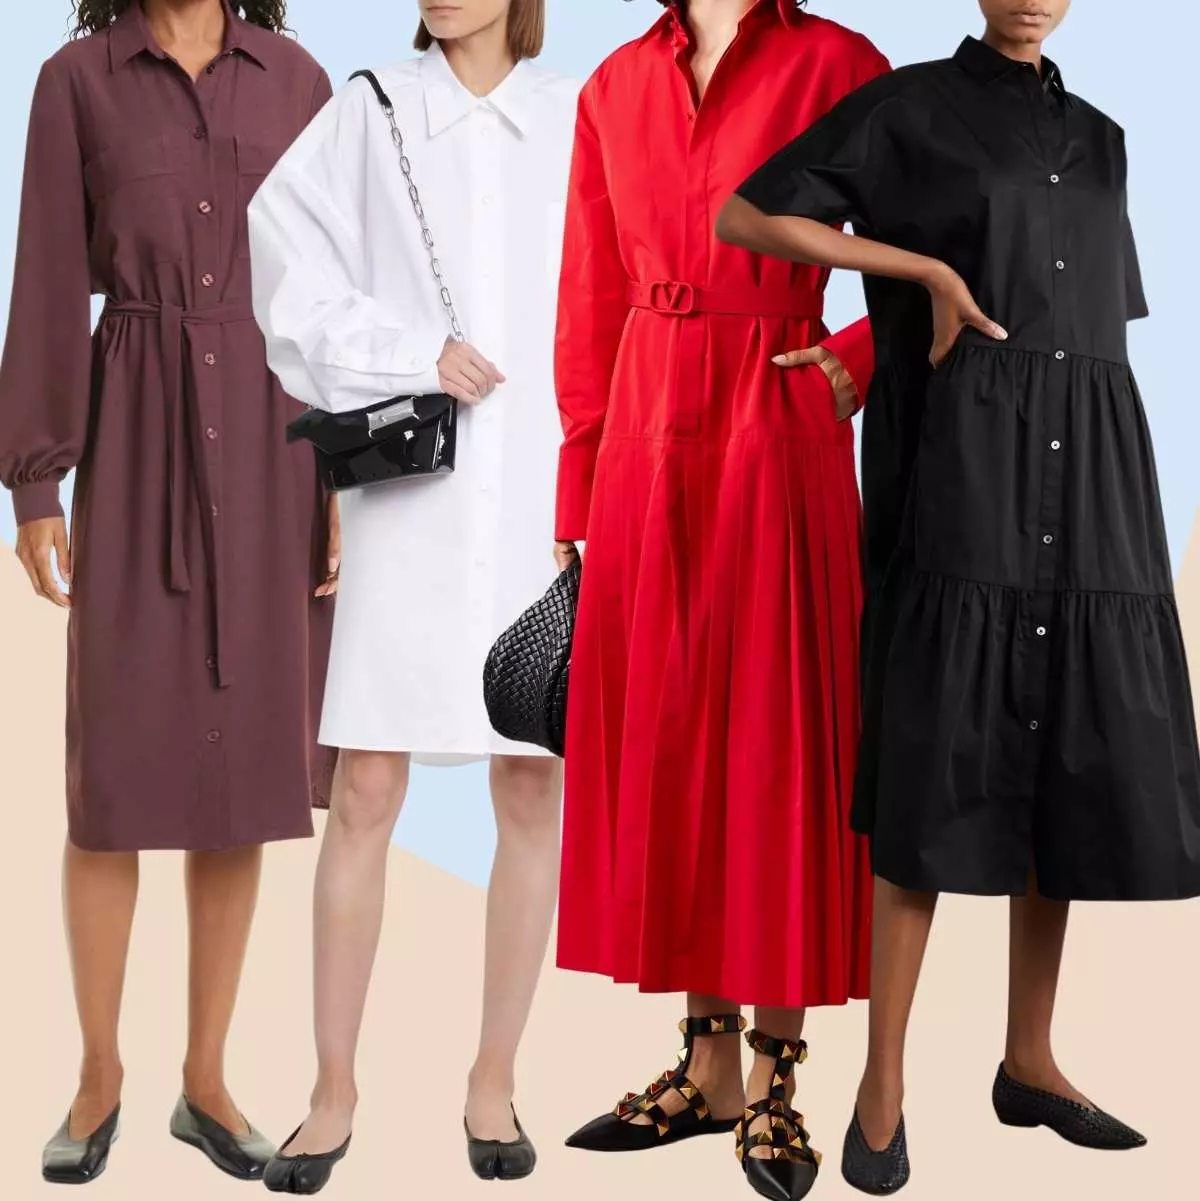 Collage of 5 women wearing different mules and clogs with a shirt dress.